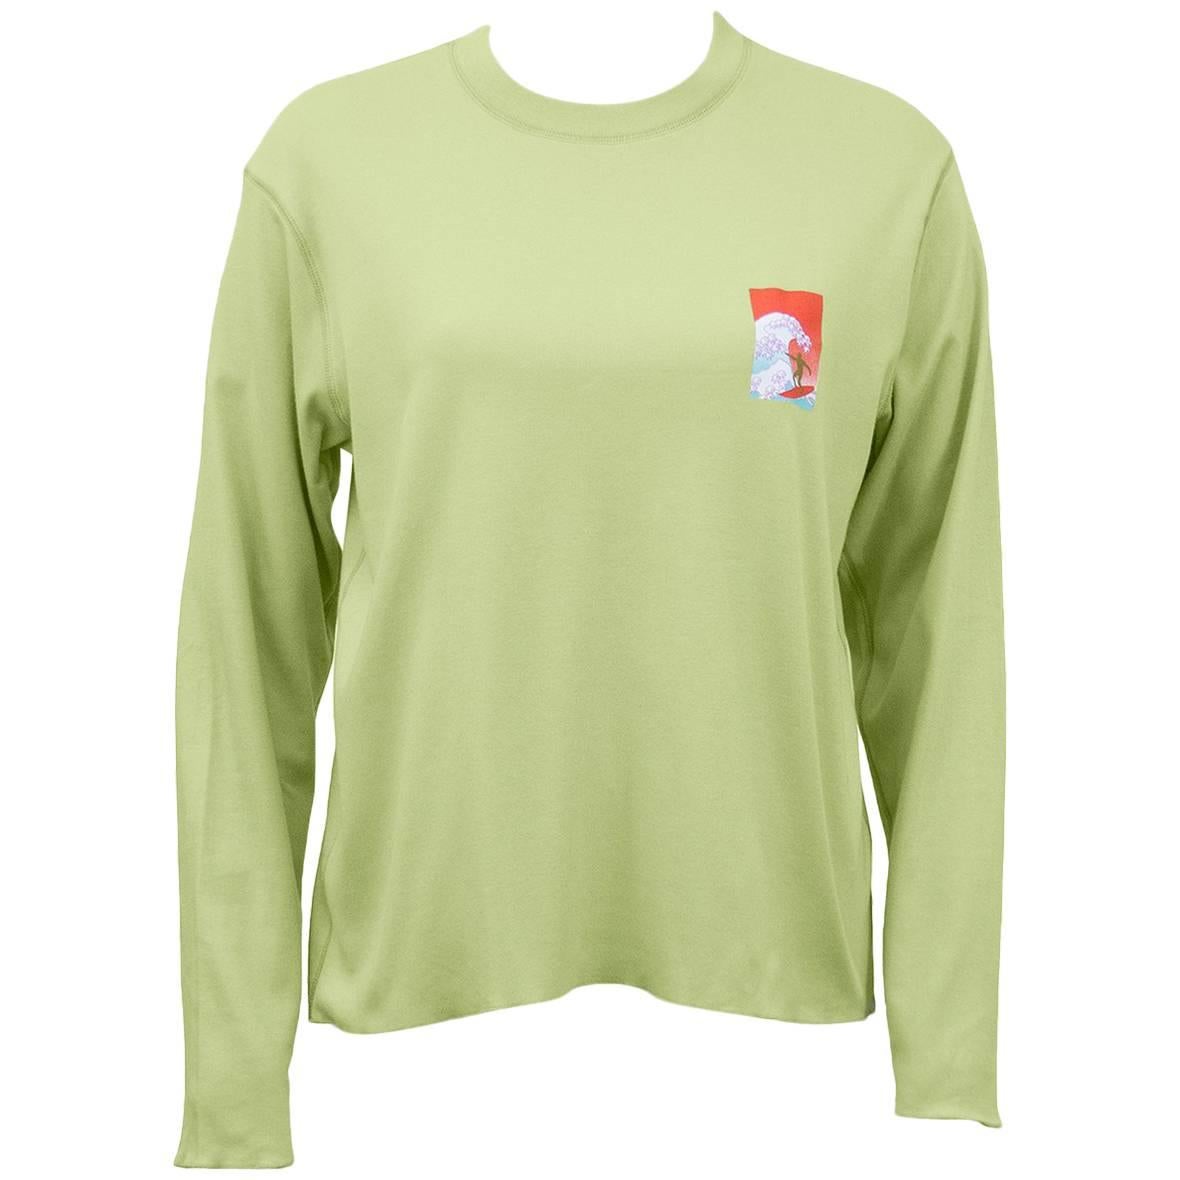 Lucien Pellat-Finet Spring Summer 2002 Lime Green Shirt with Surfer For Sale